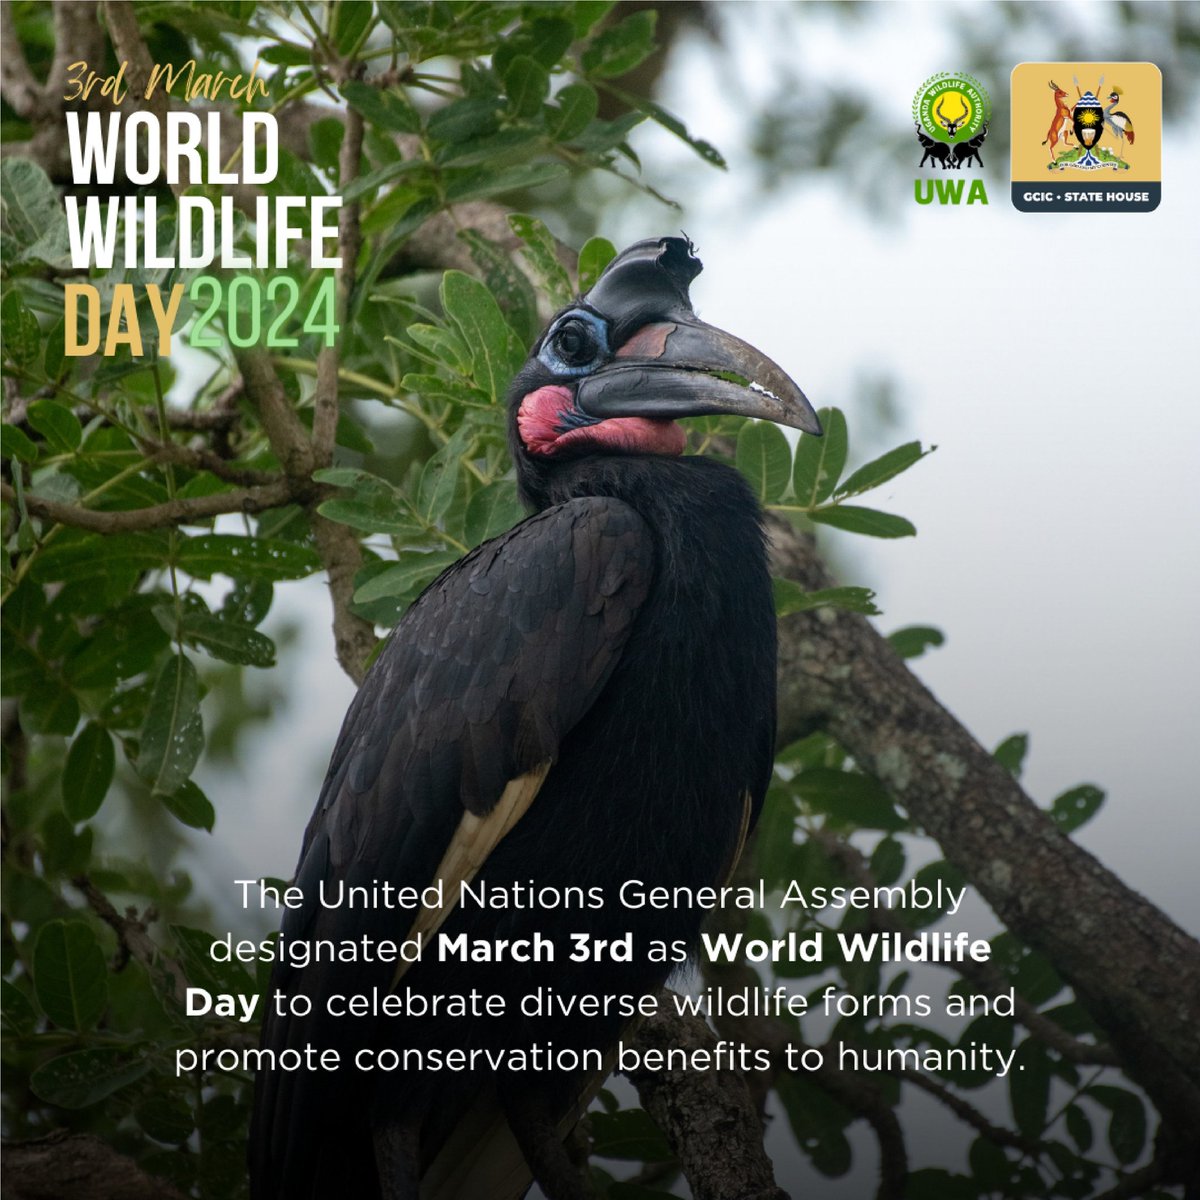 Happy World Wildlife Day! Uganda ranks high among biodiversity-rich countries globally. That is why it is also known as the Pearl of Africa.
#WWD2024 
#OpenGovtUg